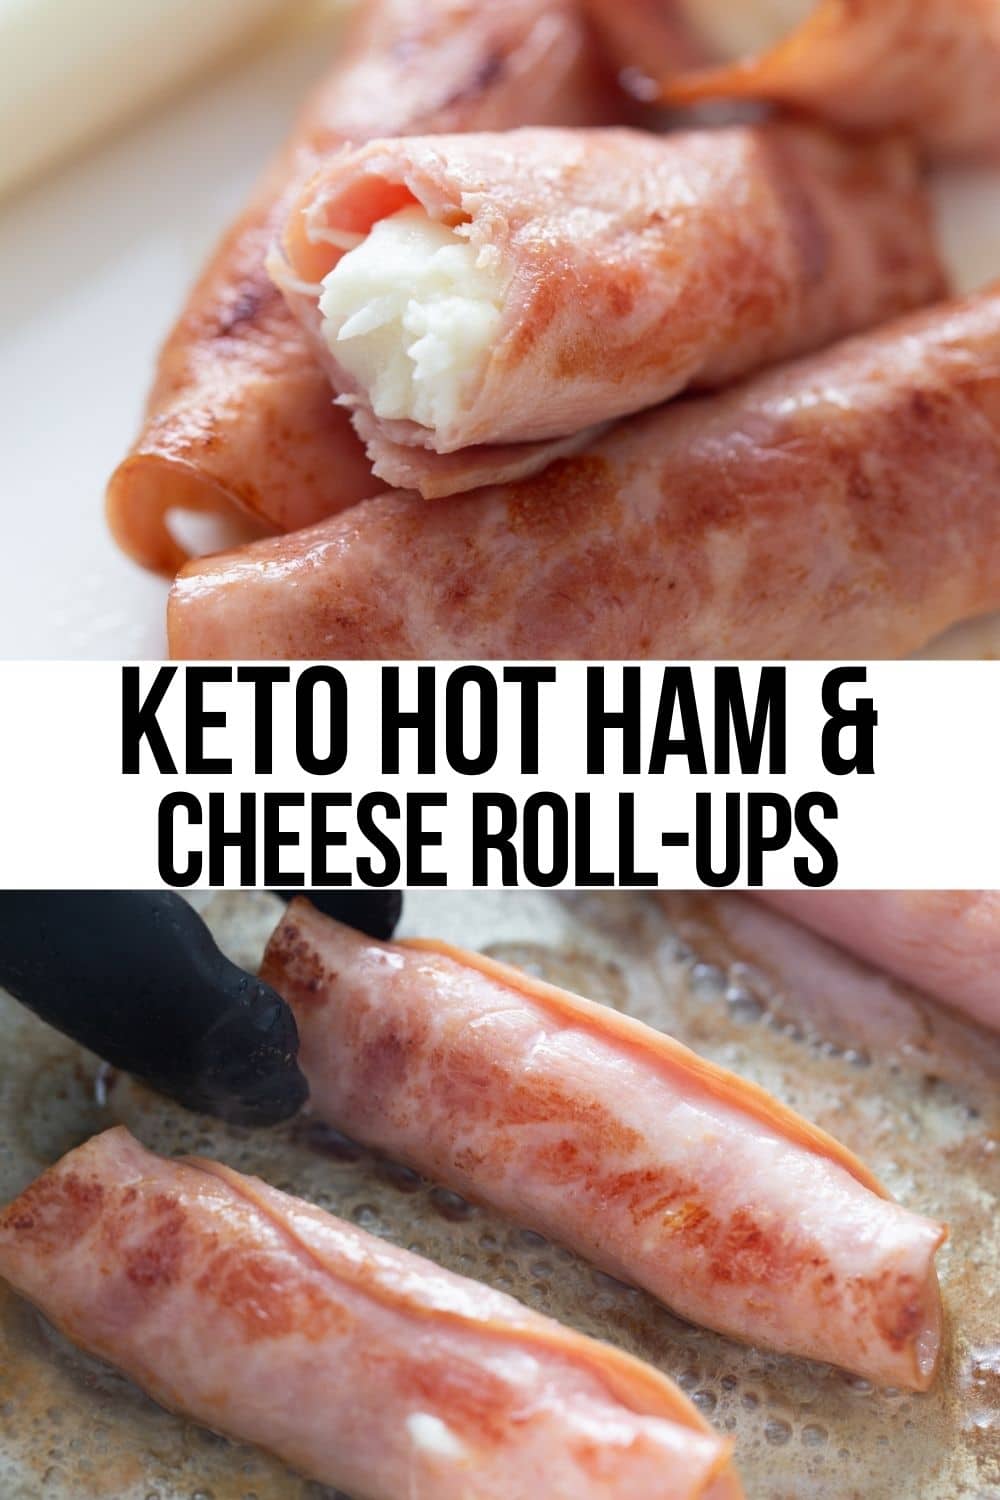 keto hot ham and cheese roll-ups in a frying pan and a bite taken out of them in a collage